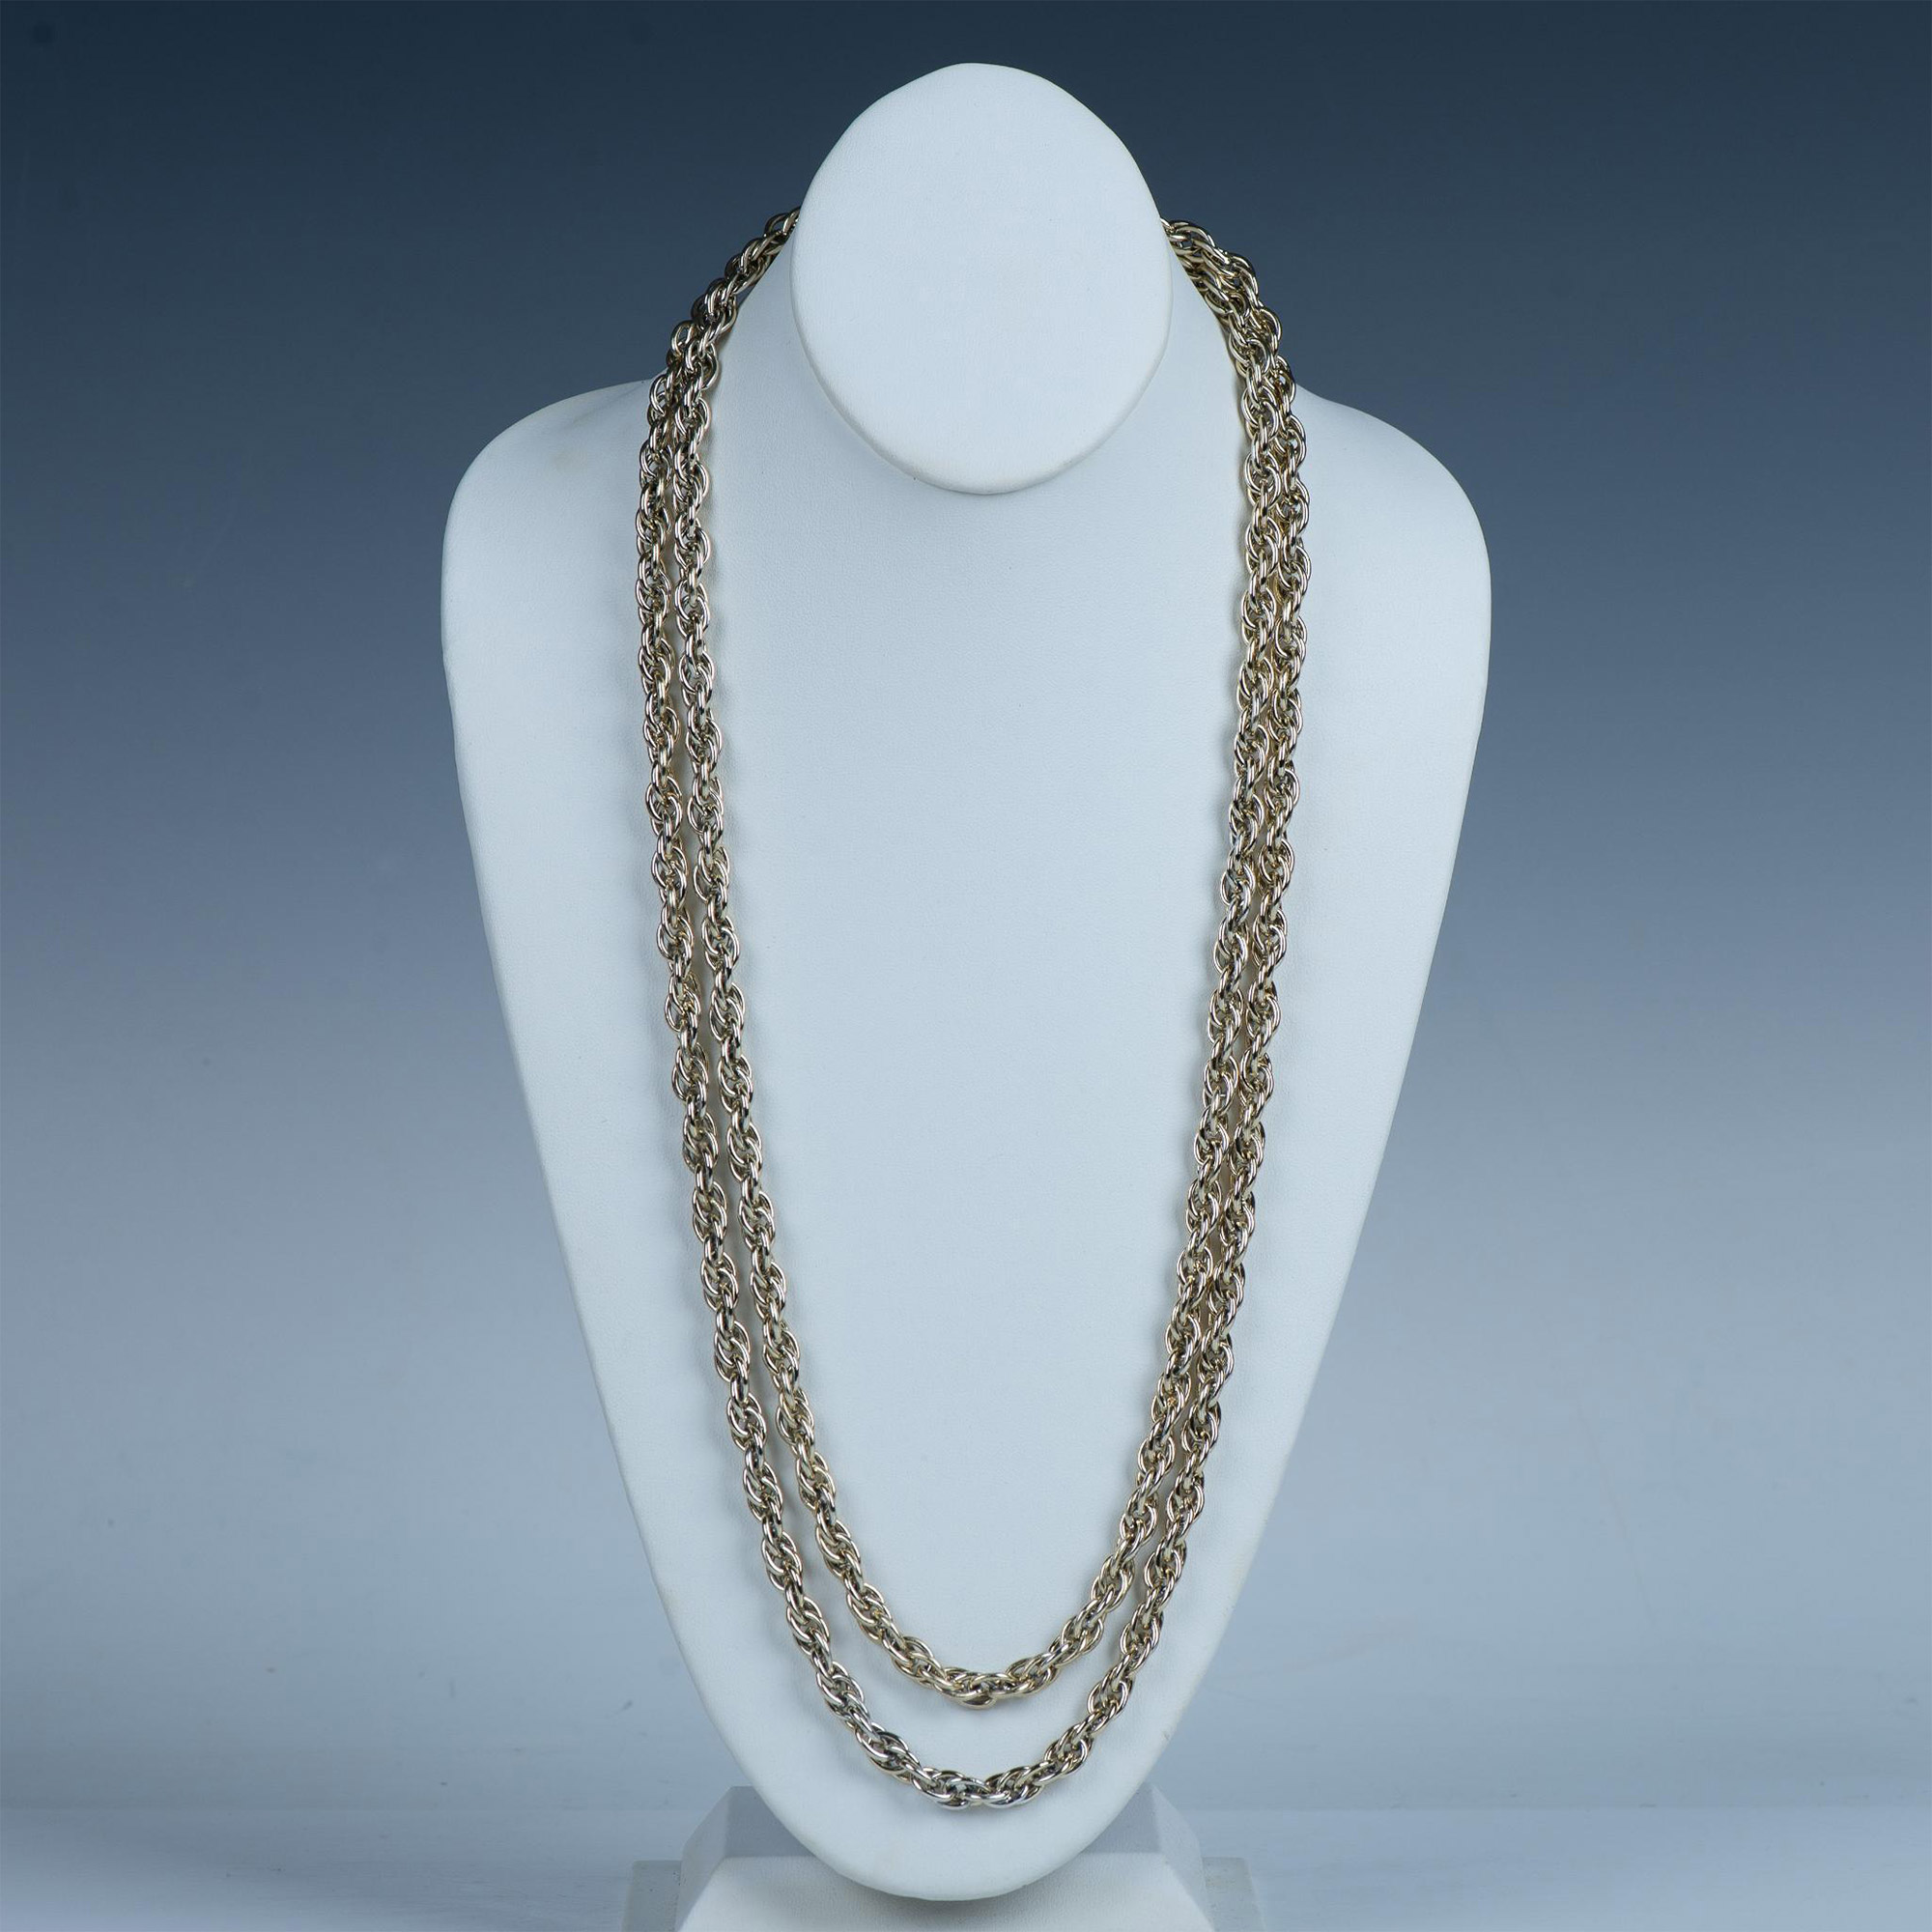 Long Twisted Gold Metal Chain - Image 5 of 6